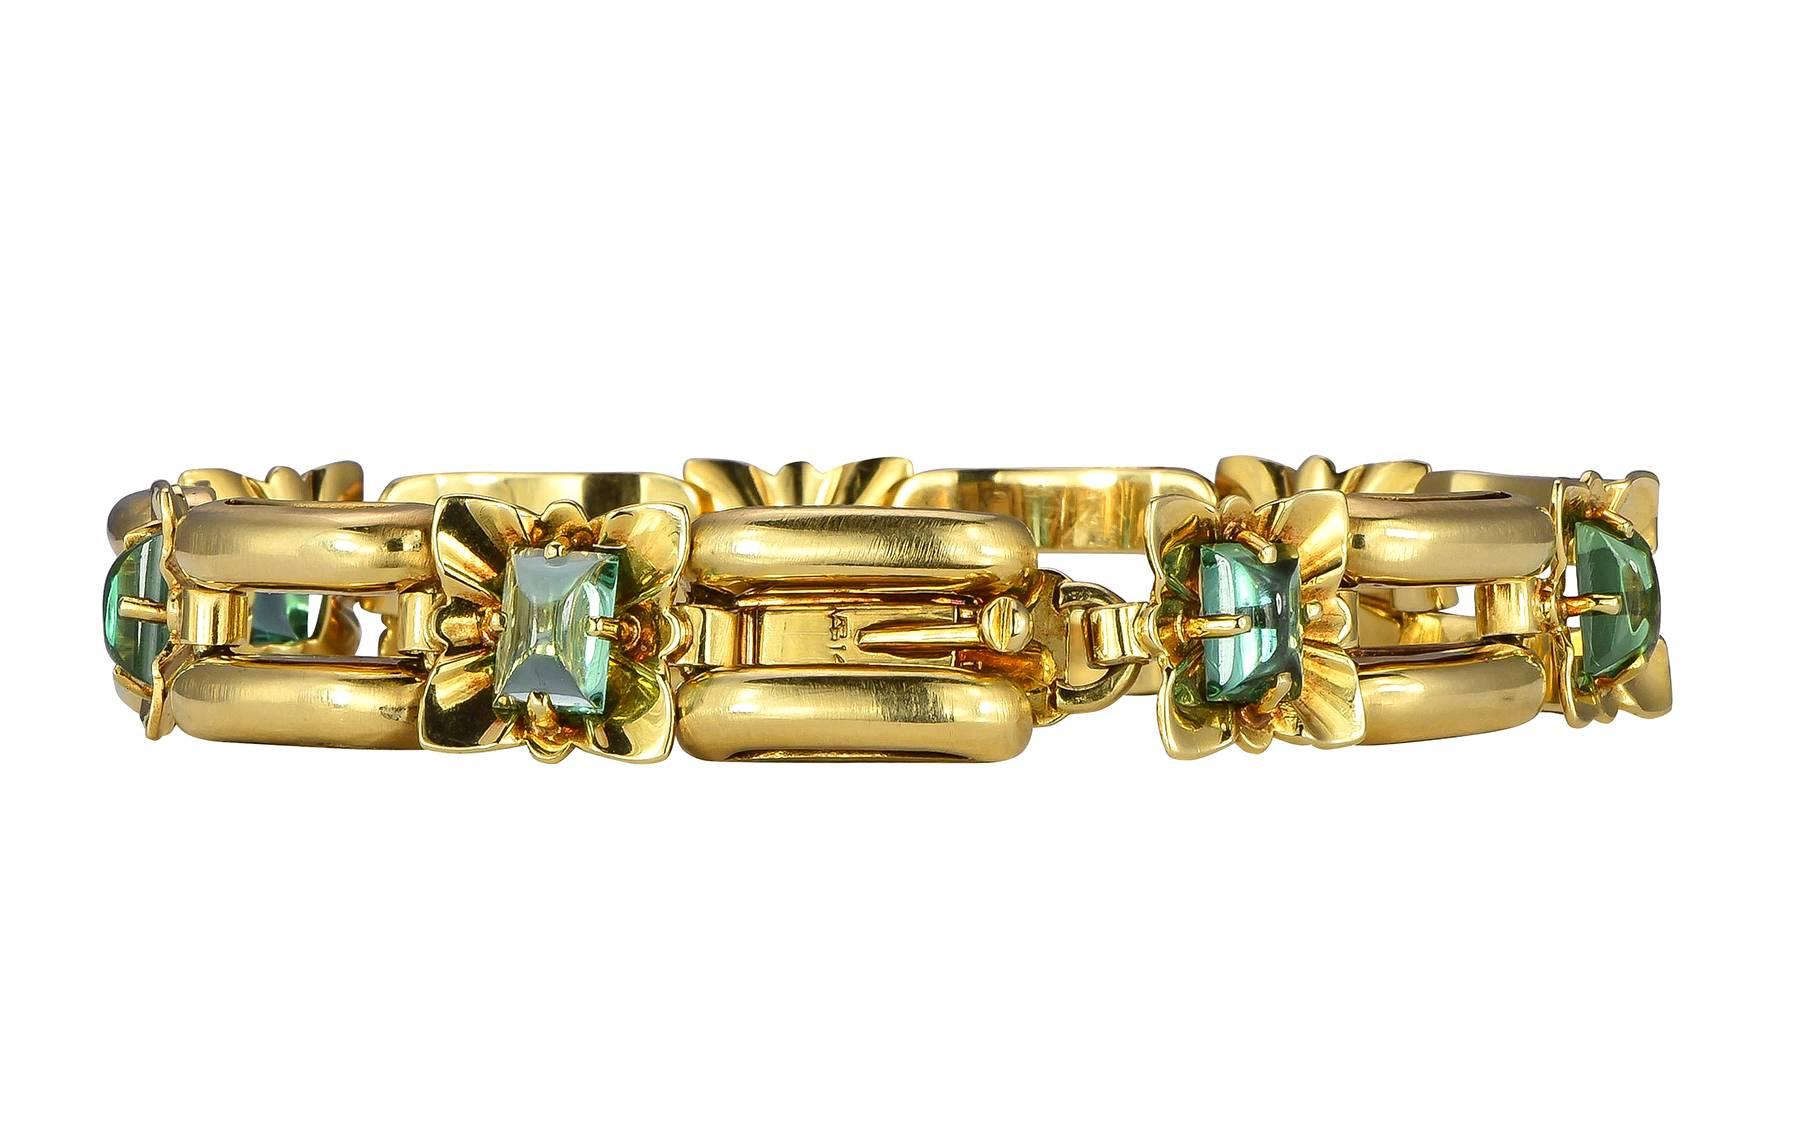 5.53ct cabochon green tourmaline and 14k yellow gold bracelet.  The tourmaline are prong set in a floral designed link, rotating every other woith double bar links.

Hallmark:  14K